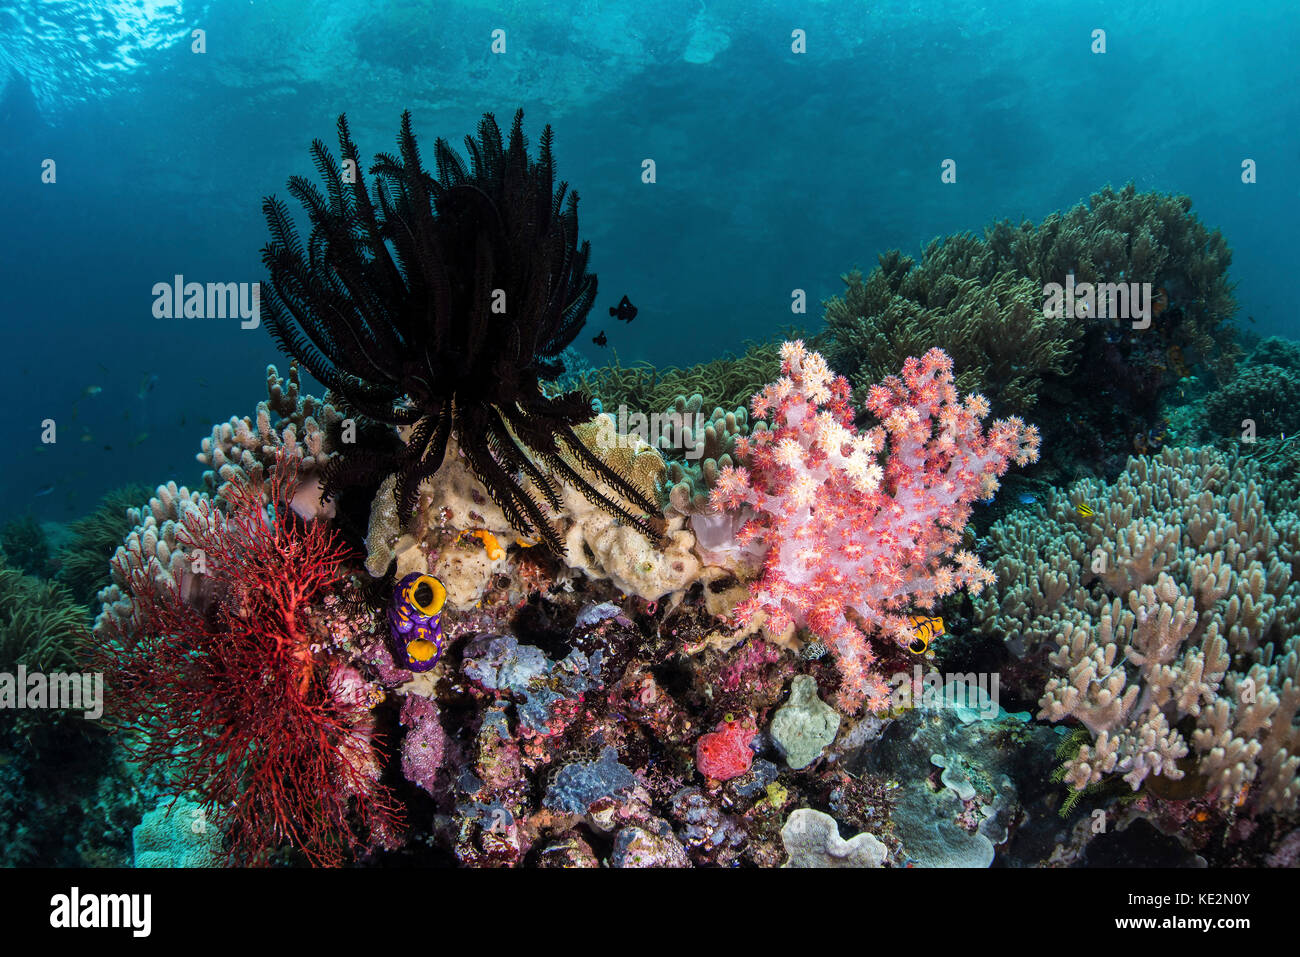 Crinoids and soft corals cover this reef in Raja Ampat, Indonesia. Stock Photo